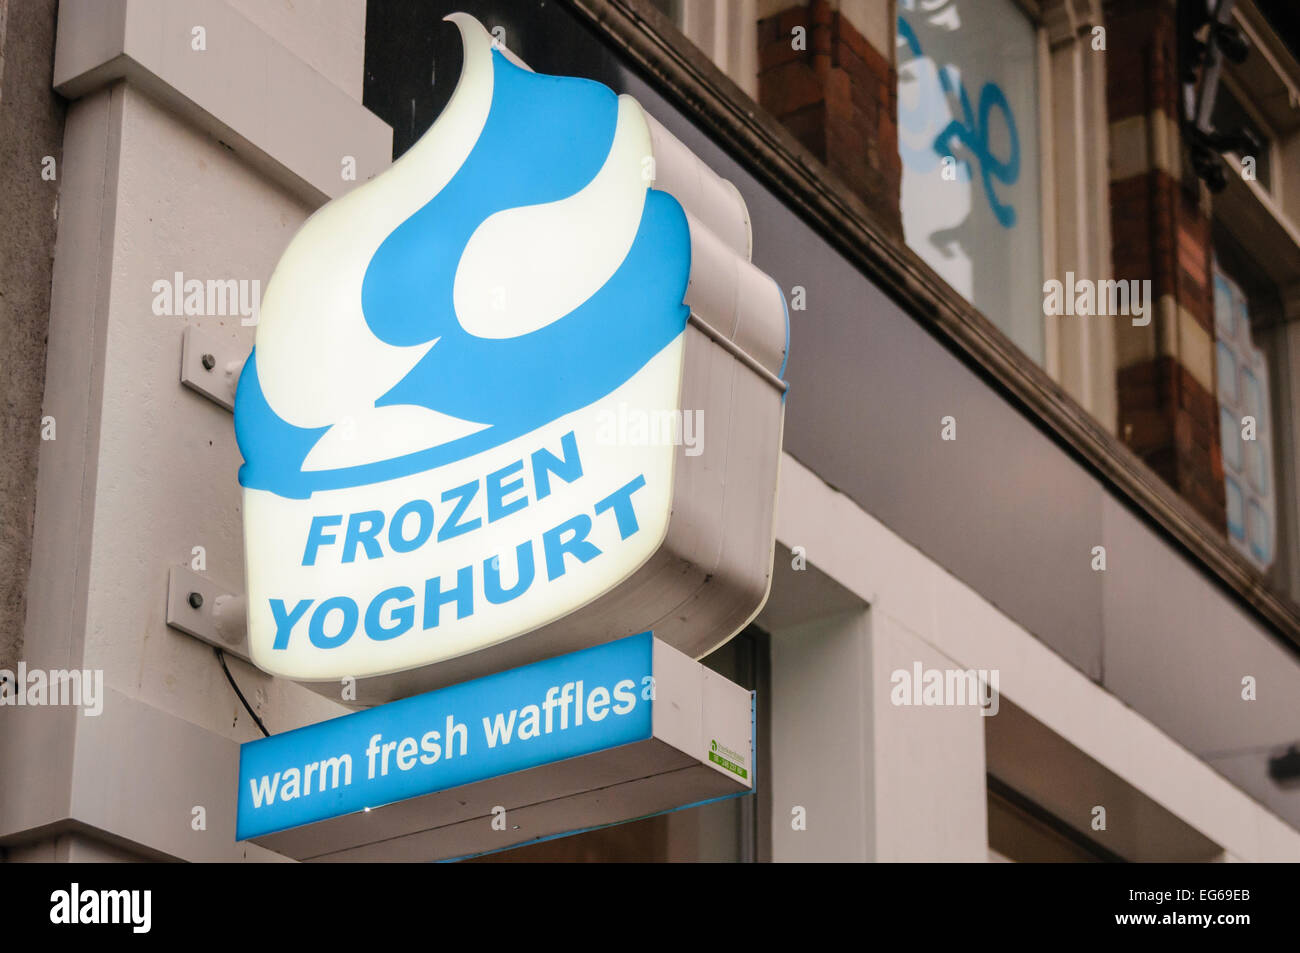 Sign at a shop selling frozen yoghurt on warm, fresh waffles. Stock Photo